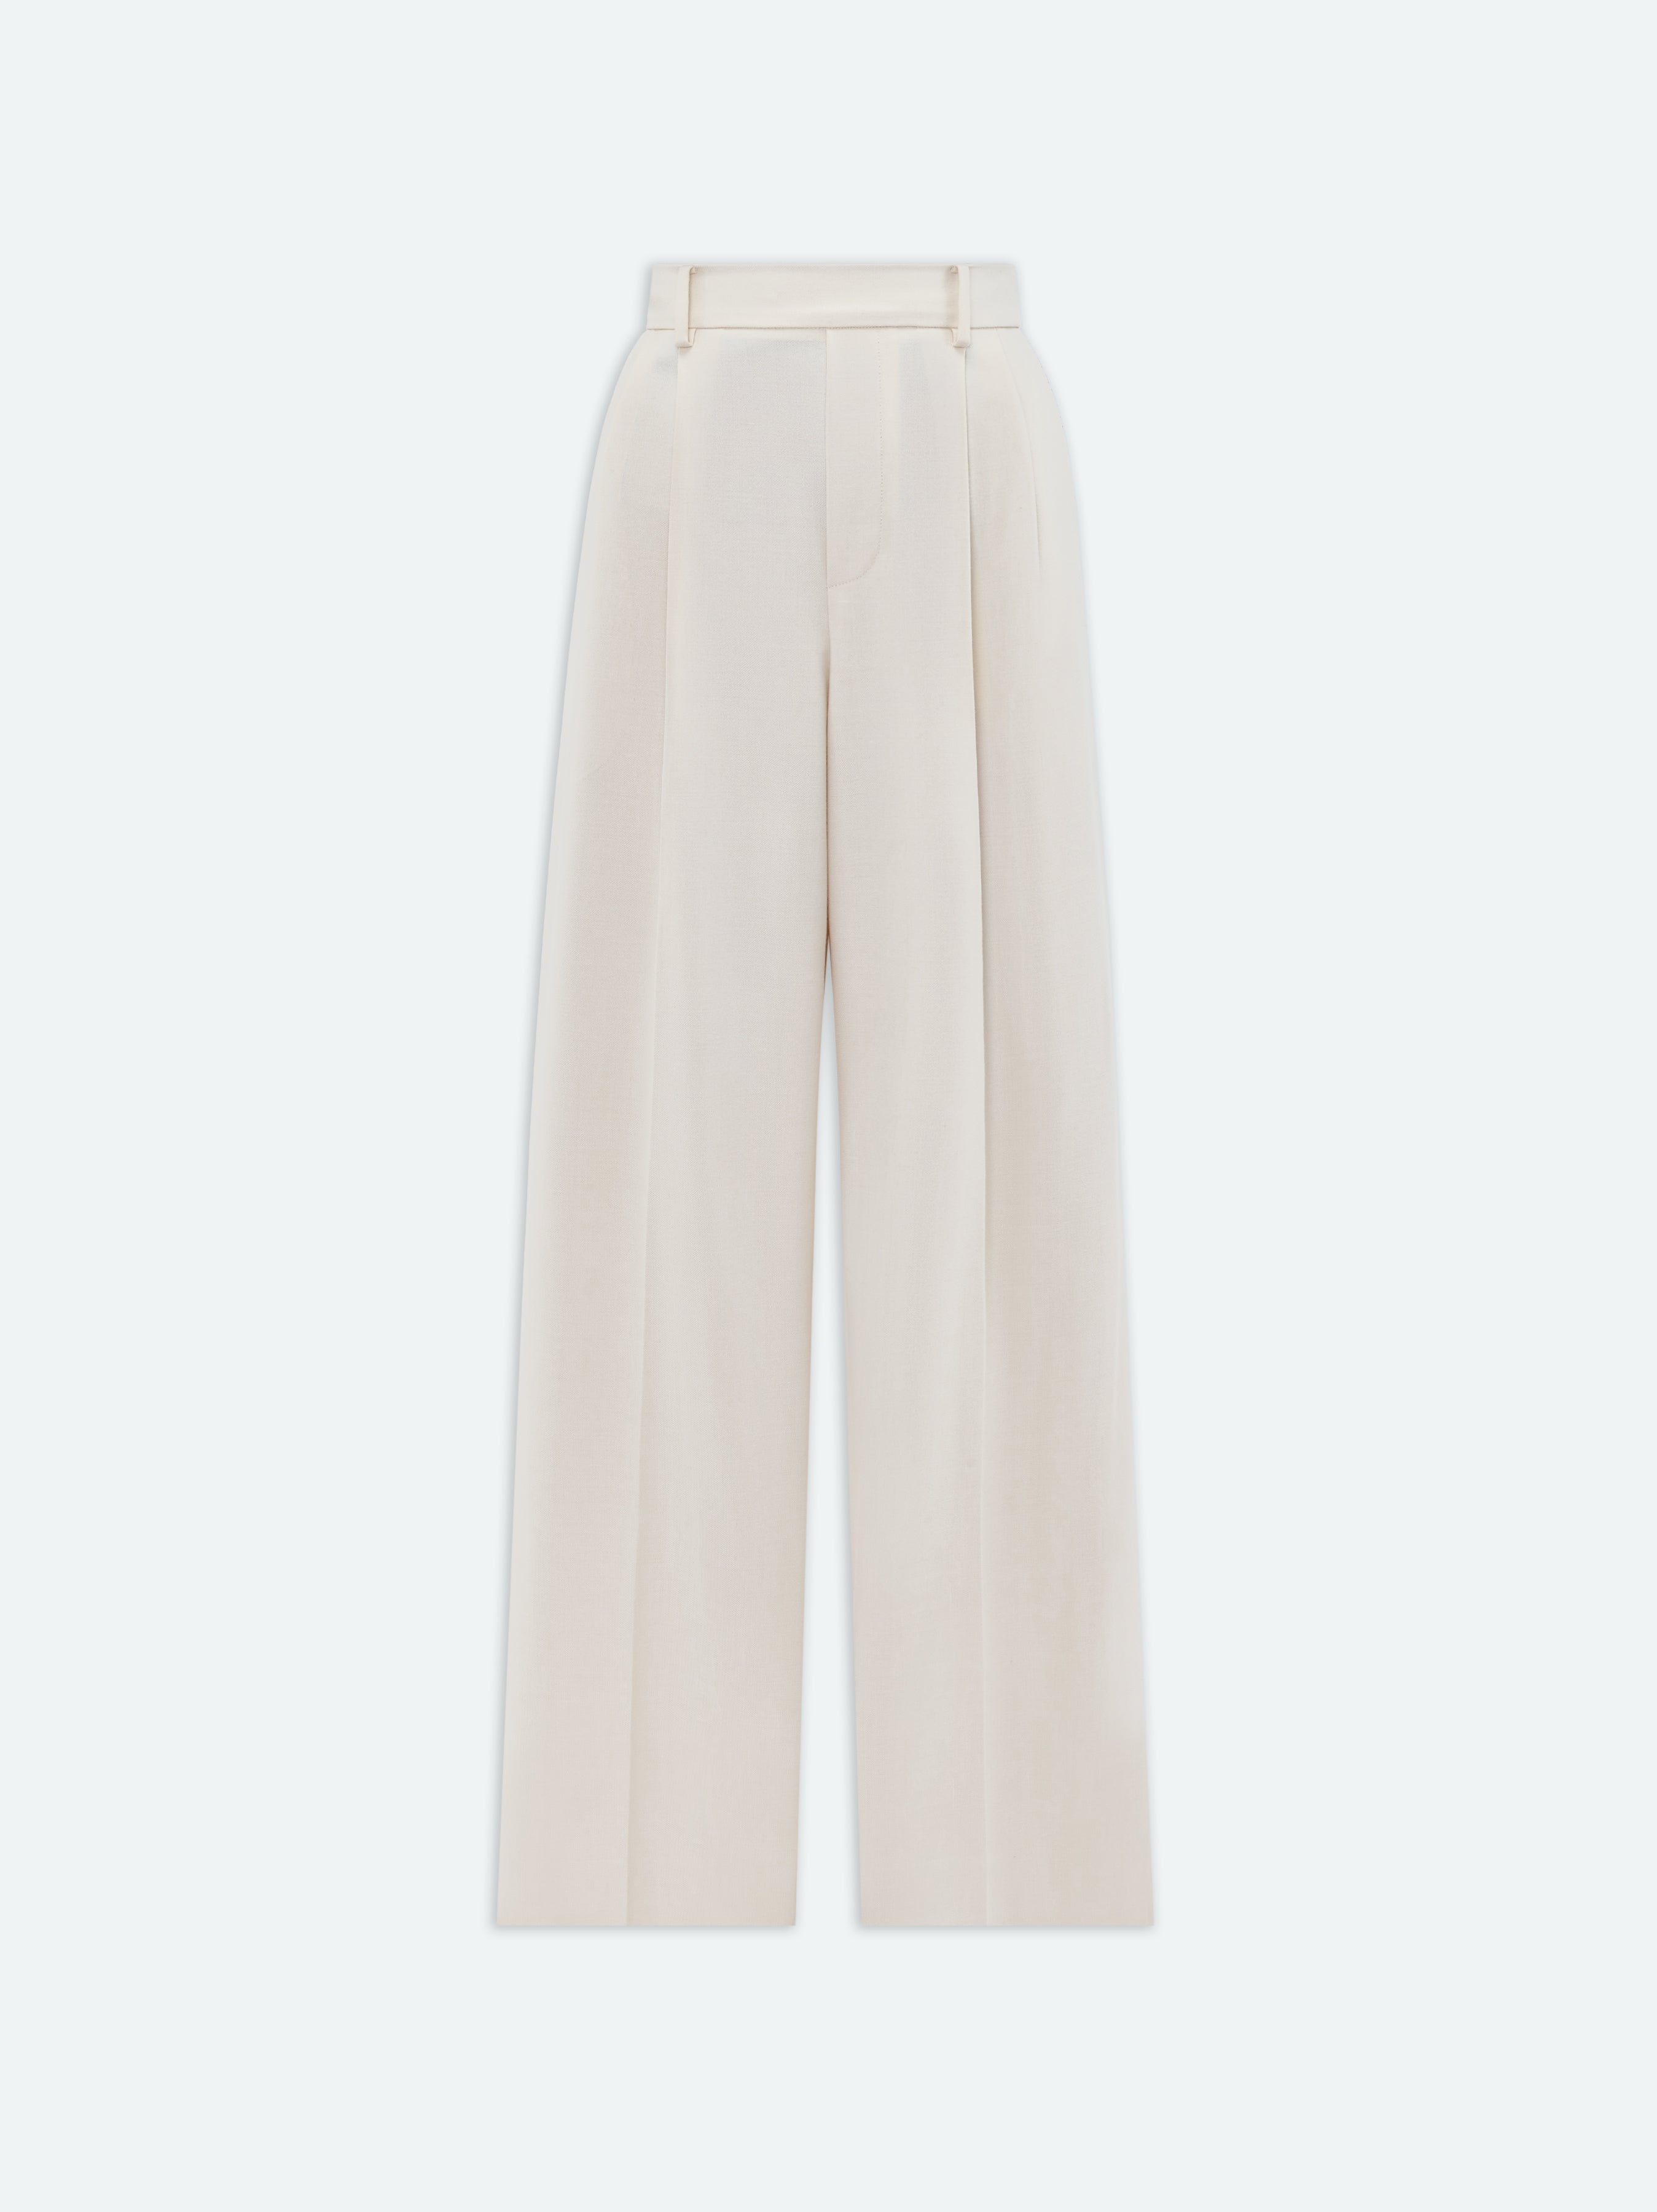 Product WOMEN - RELAXED DOUBLE PLEATED PANT - Summer Sand featured image